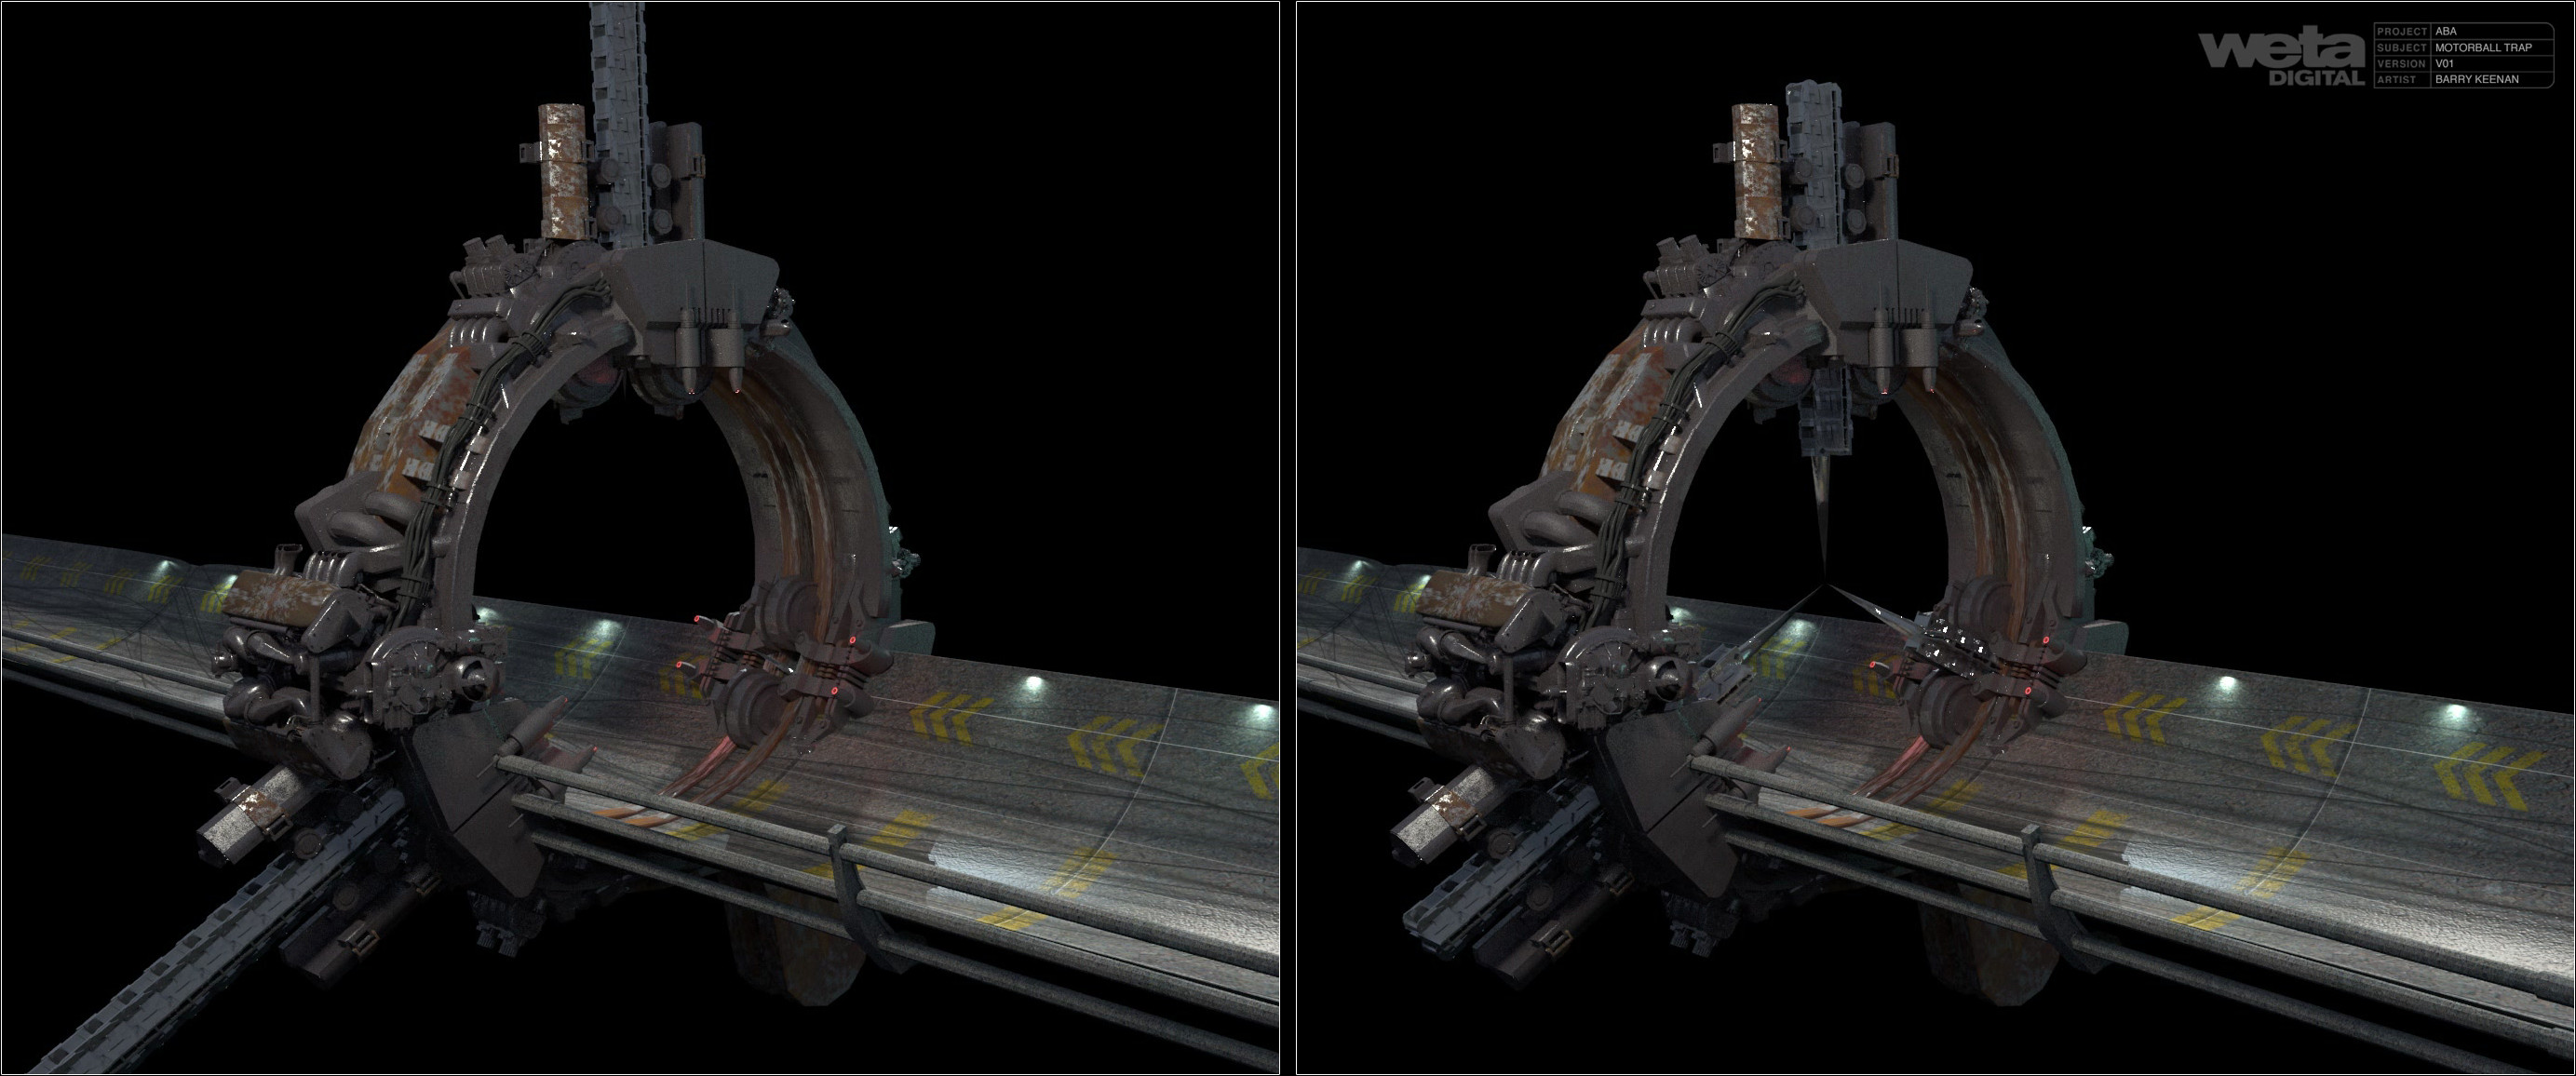 Up-rezed motorball trap, showing trap mechanism. Kitbashed using library assets.